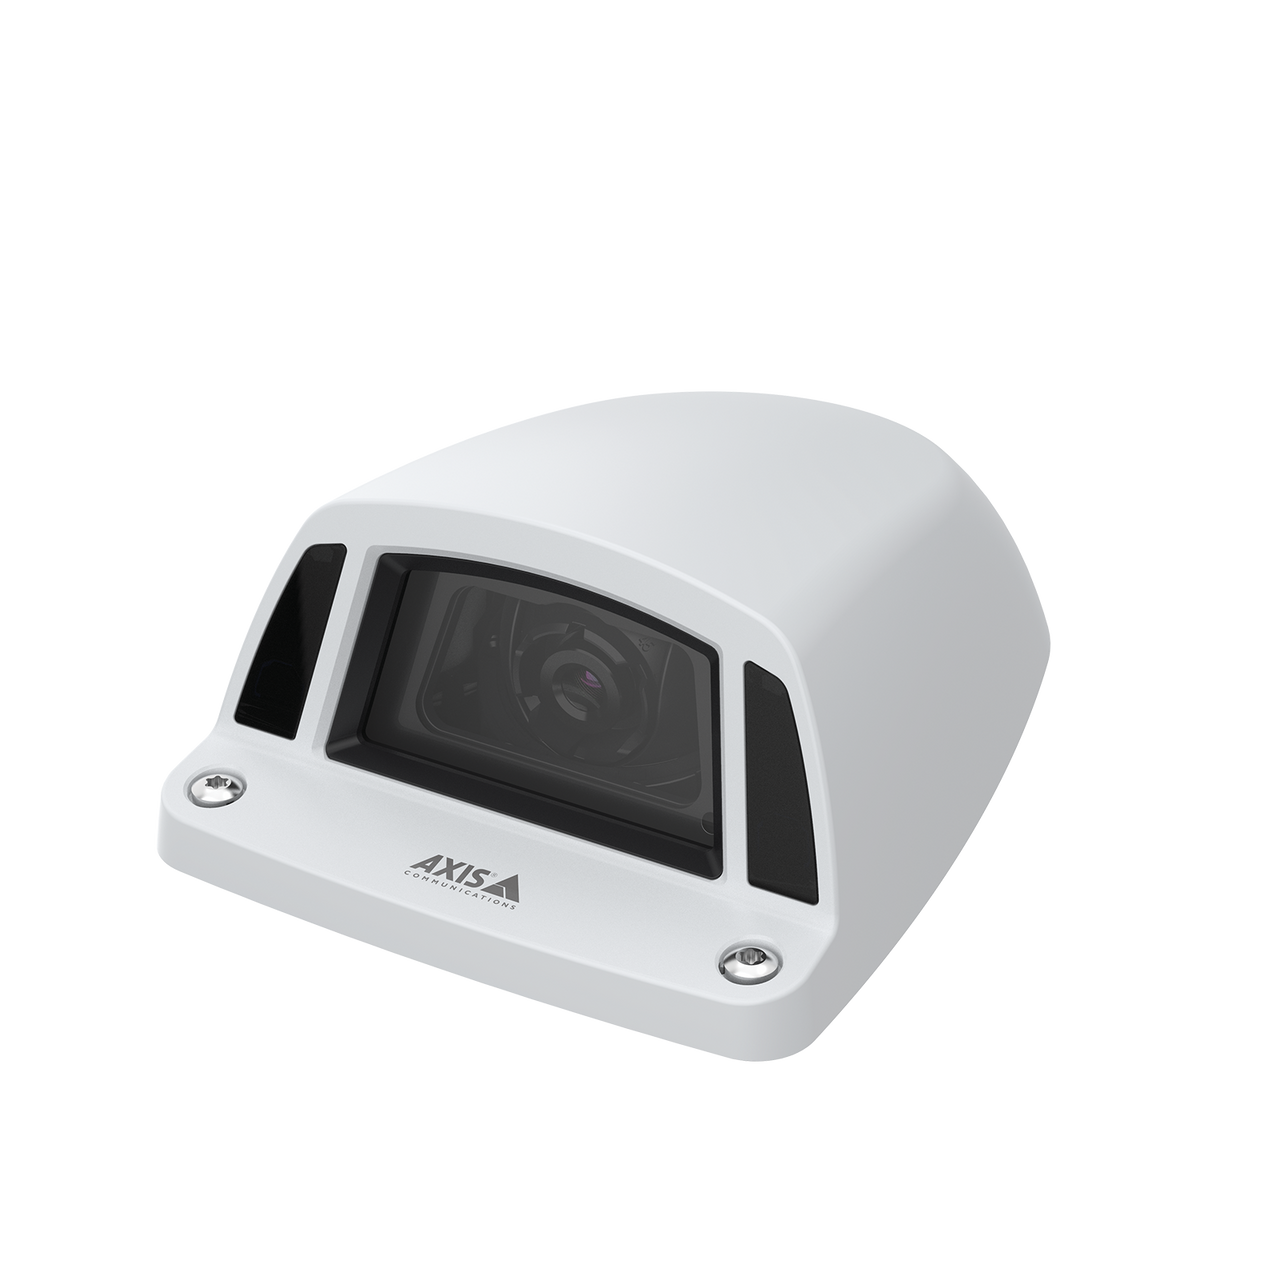 AXIS P3925-LRE M12 Onboard camera – for exterior use in any light